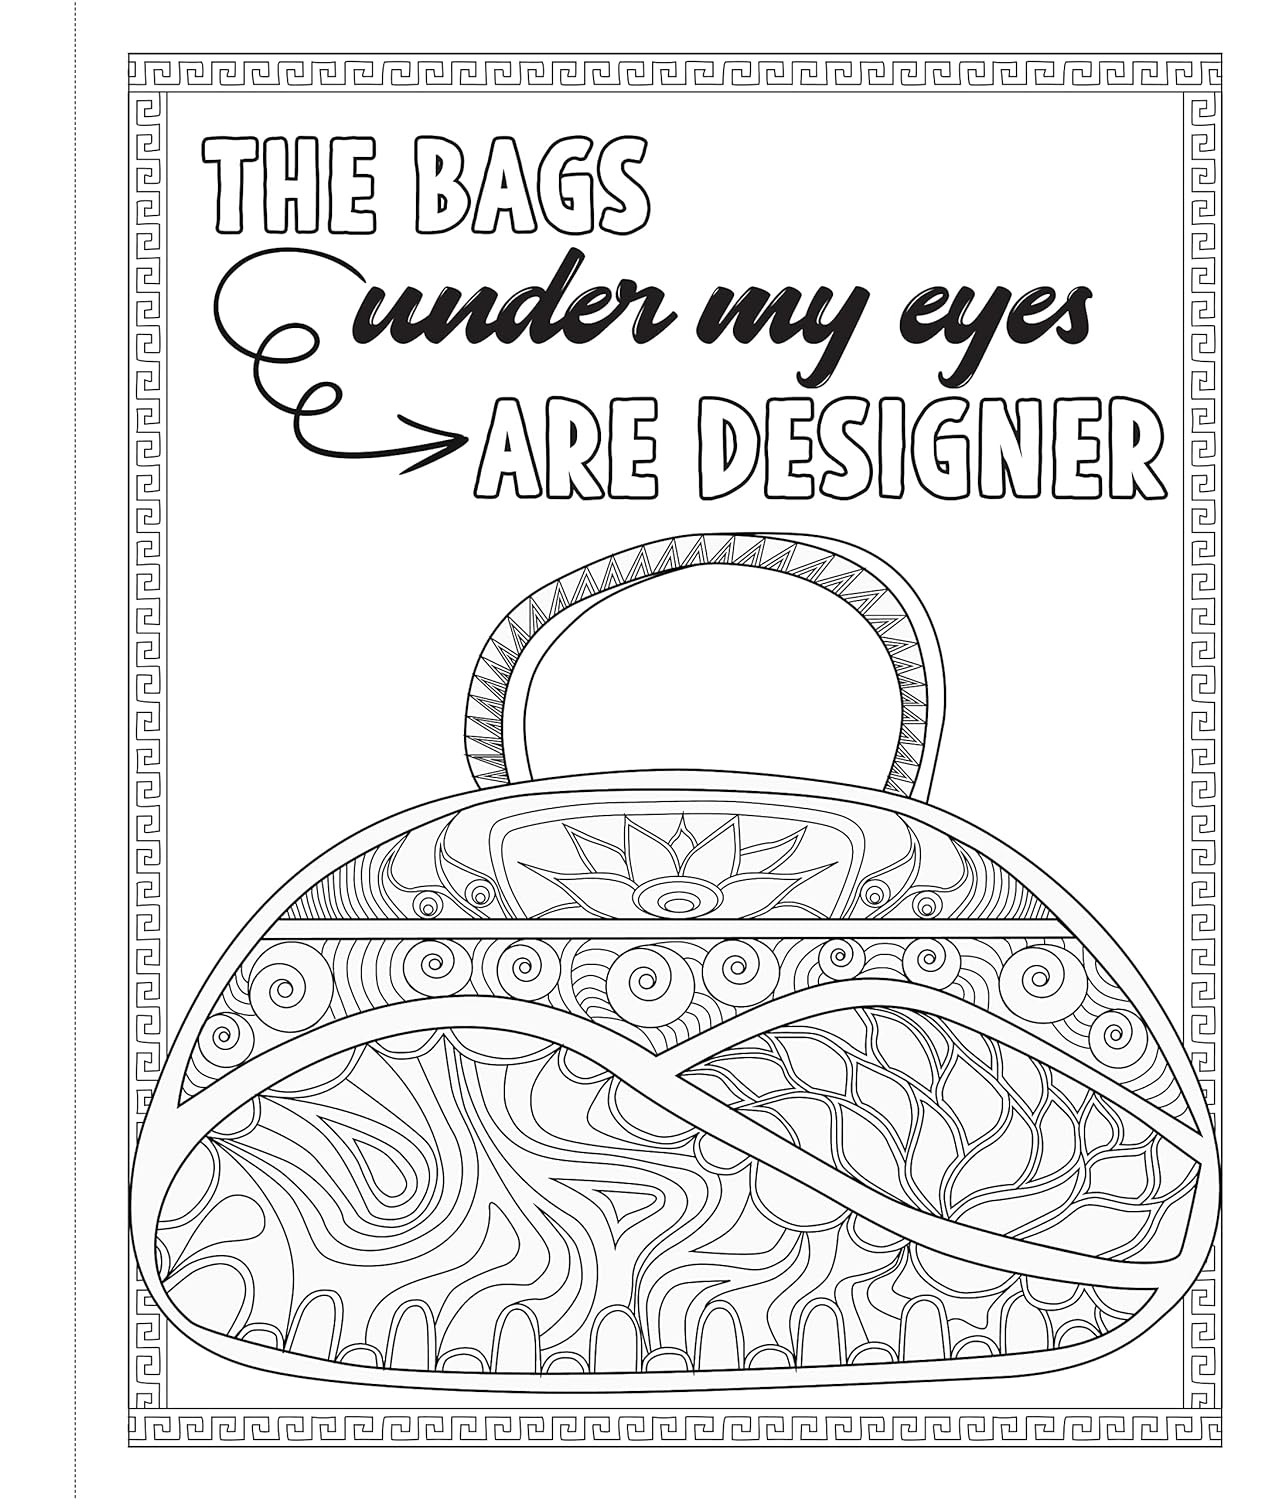 Too Glam To Give A Damn: A Sassy Coloring Book to Cheer You Up